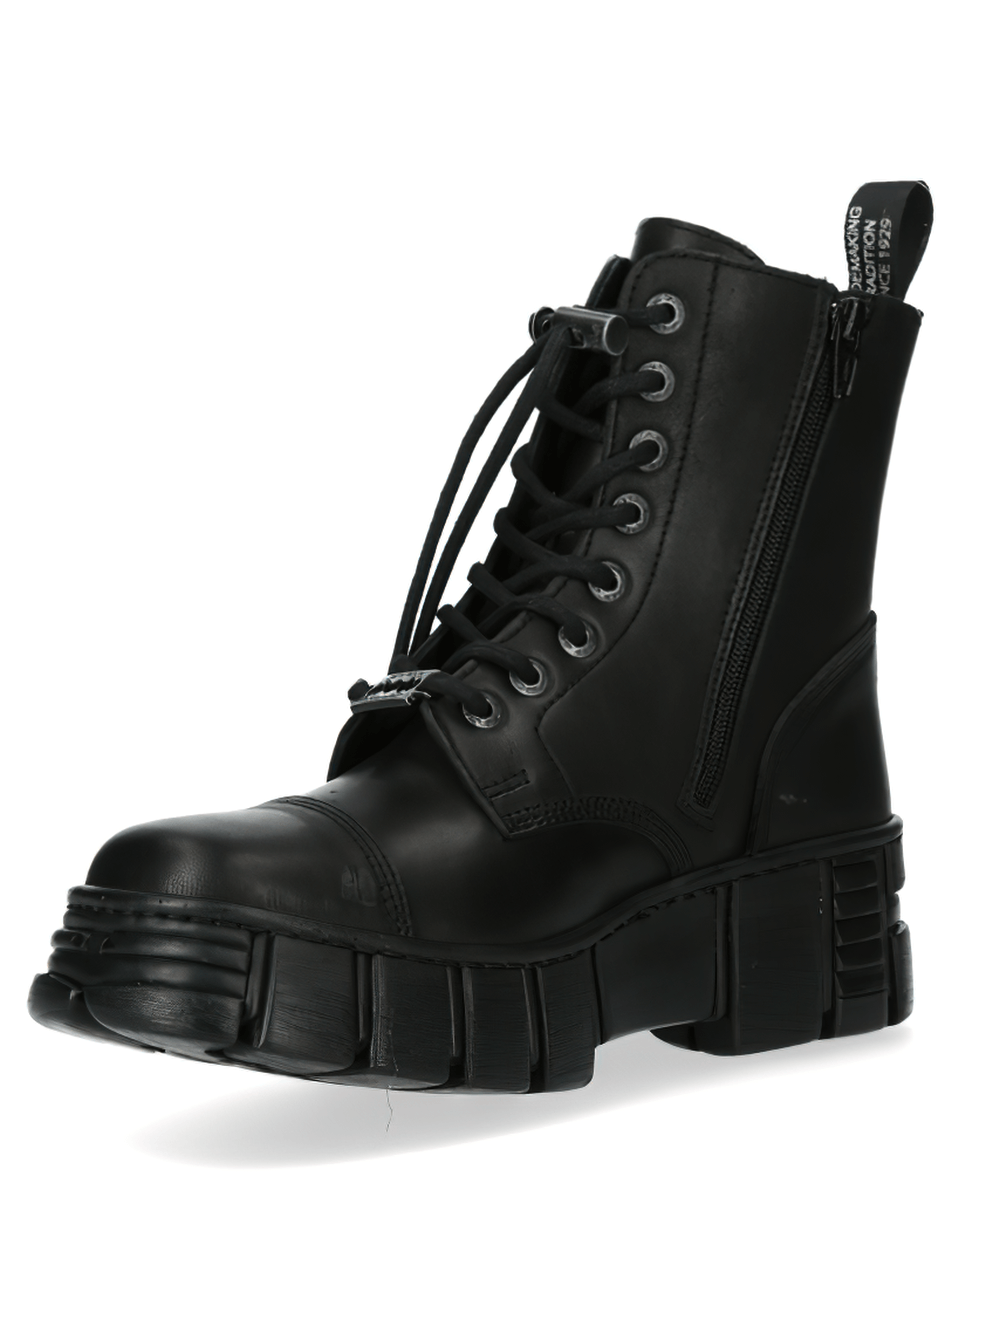 NEW ROCK Military Gothic Ankle Boots in Black Leather